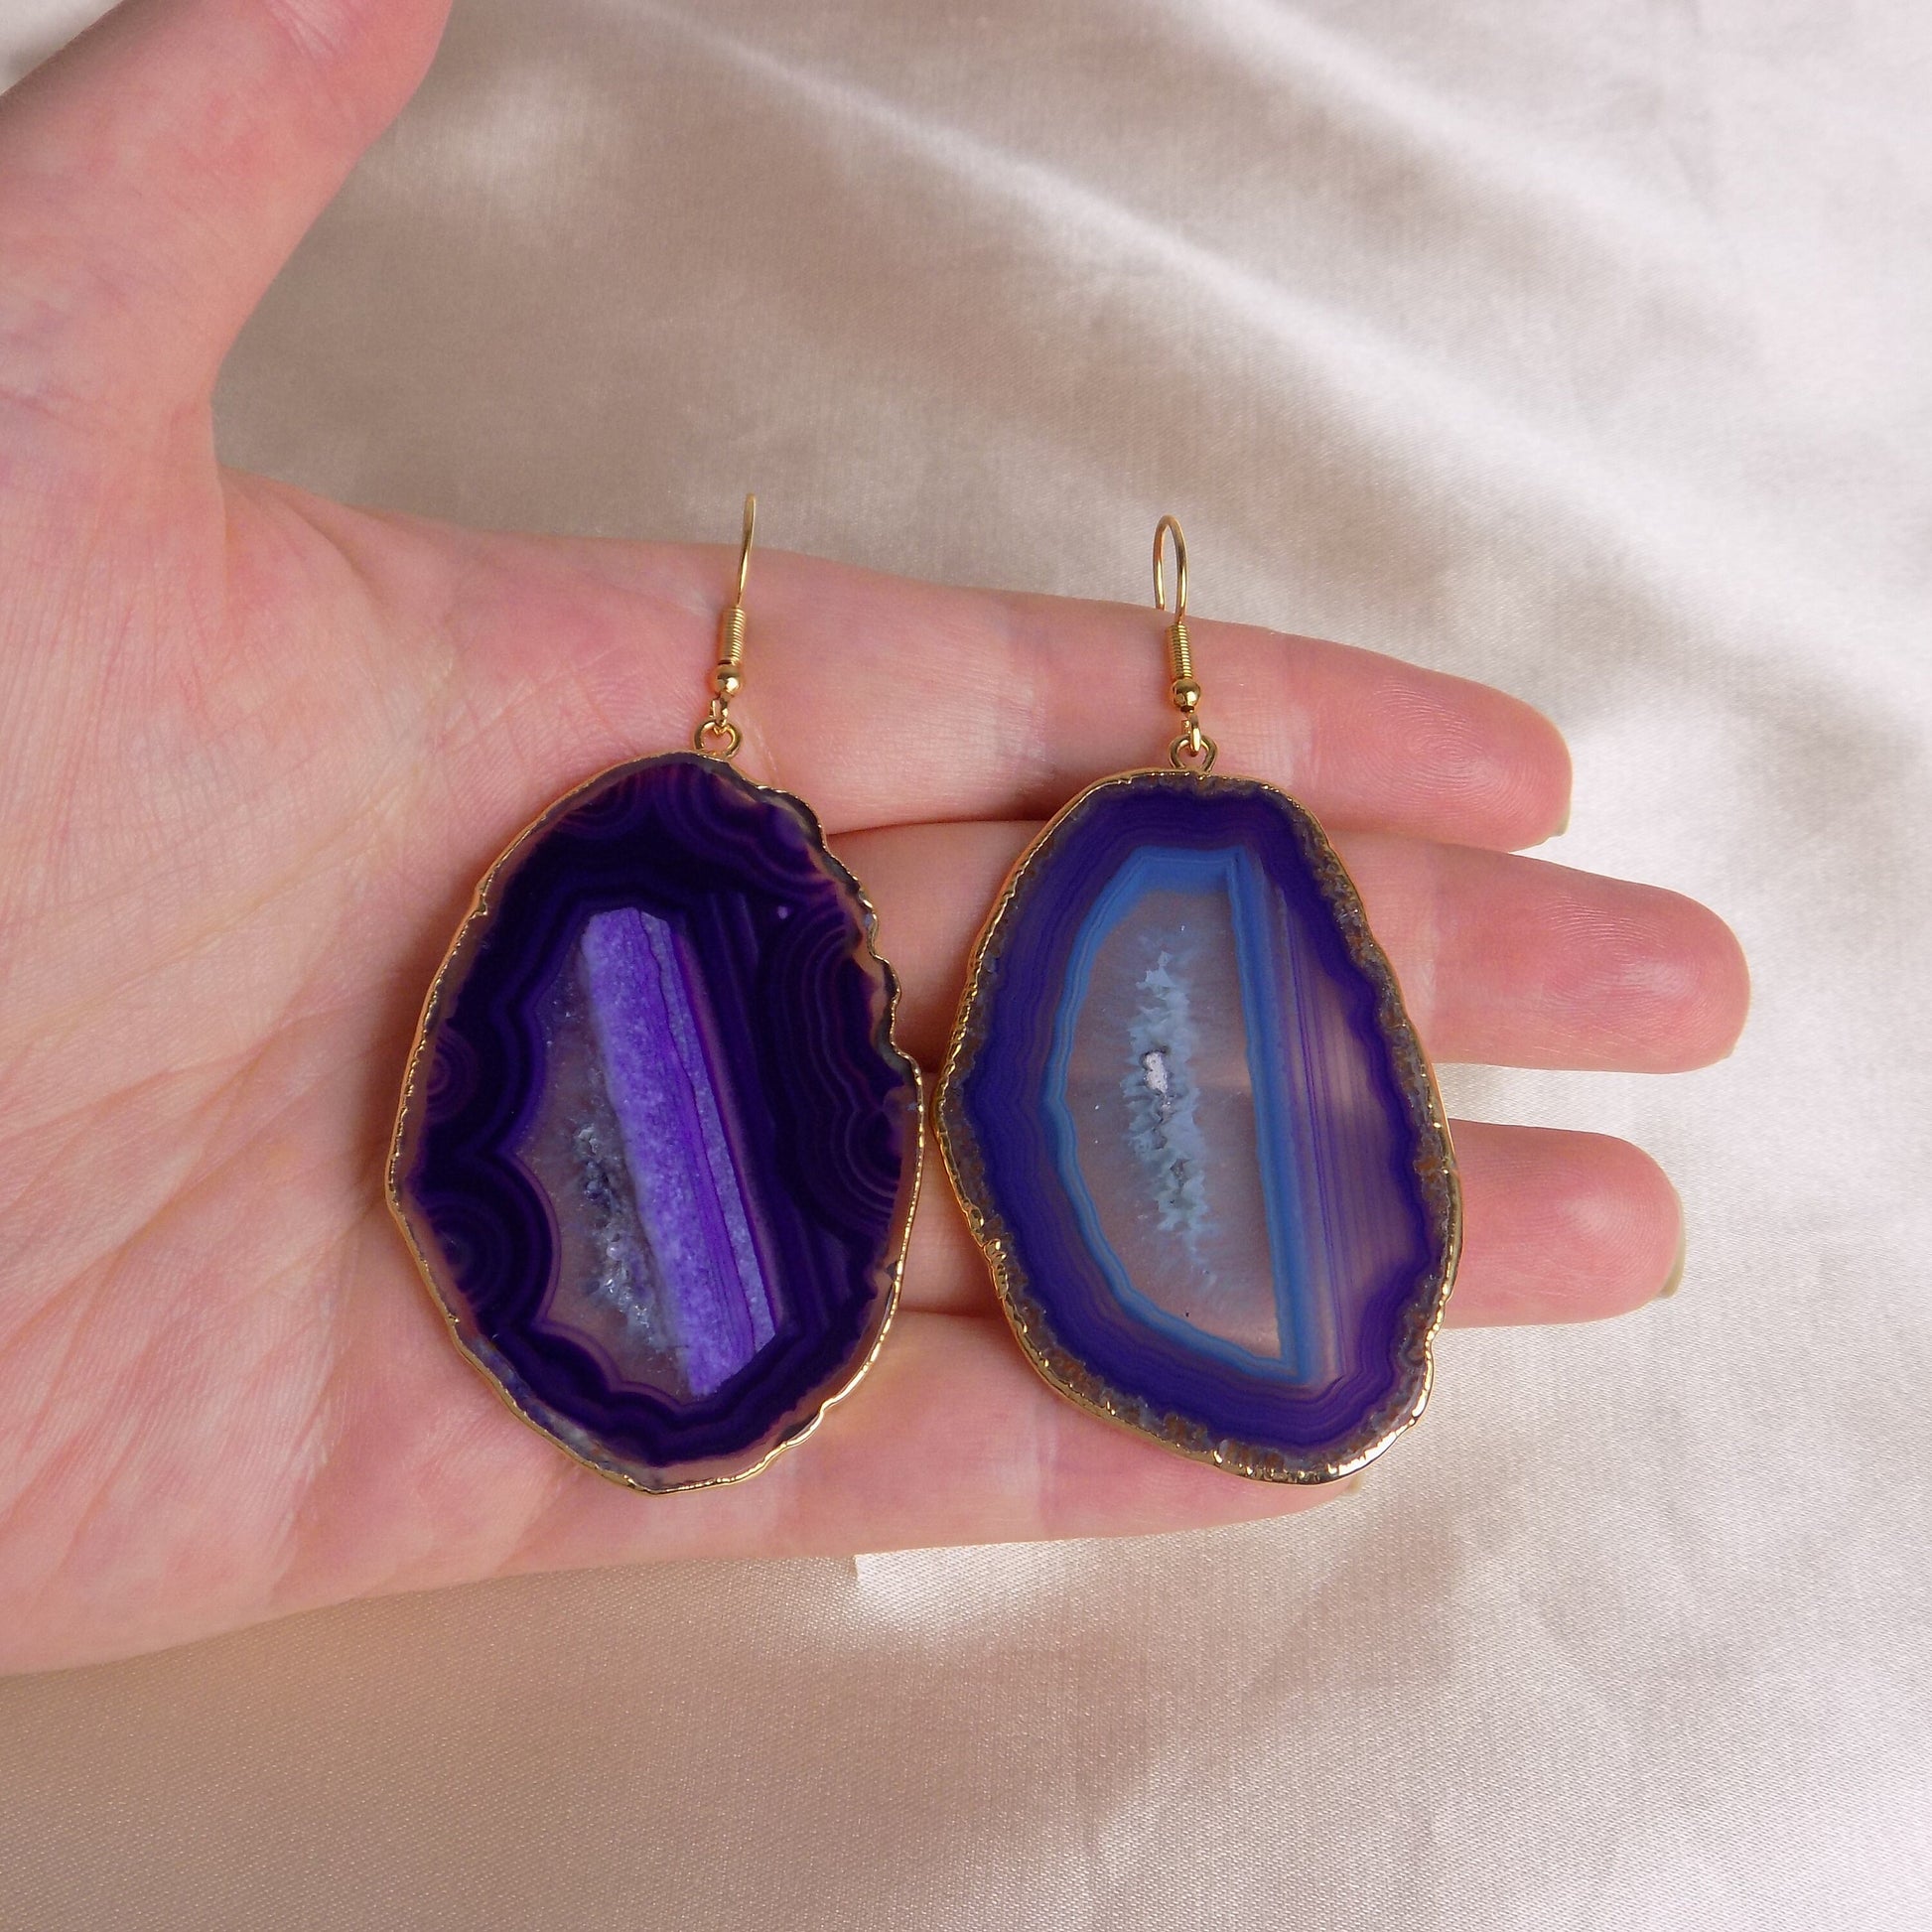 Unique Purple Agate Earrings Gold - Large Sliced Geode Dangle - Christmas Gift For Her - G15-228